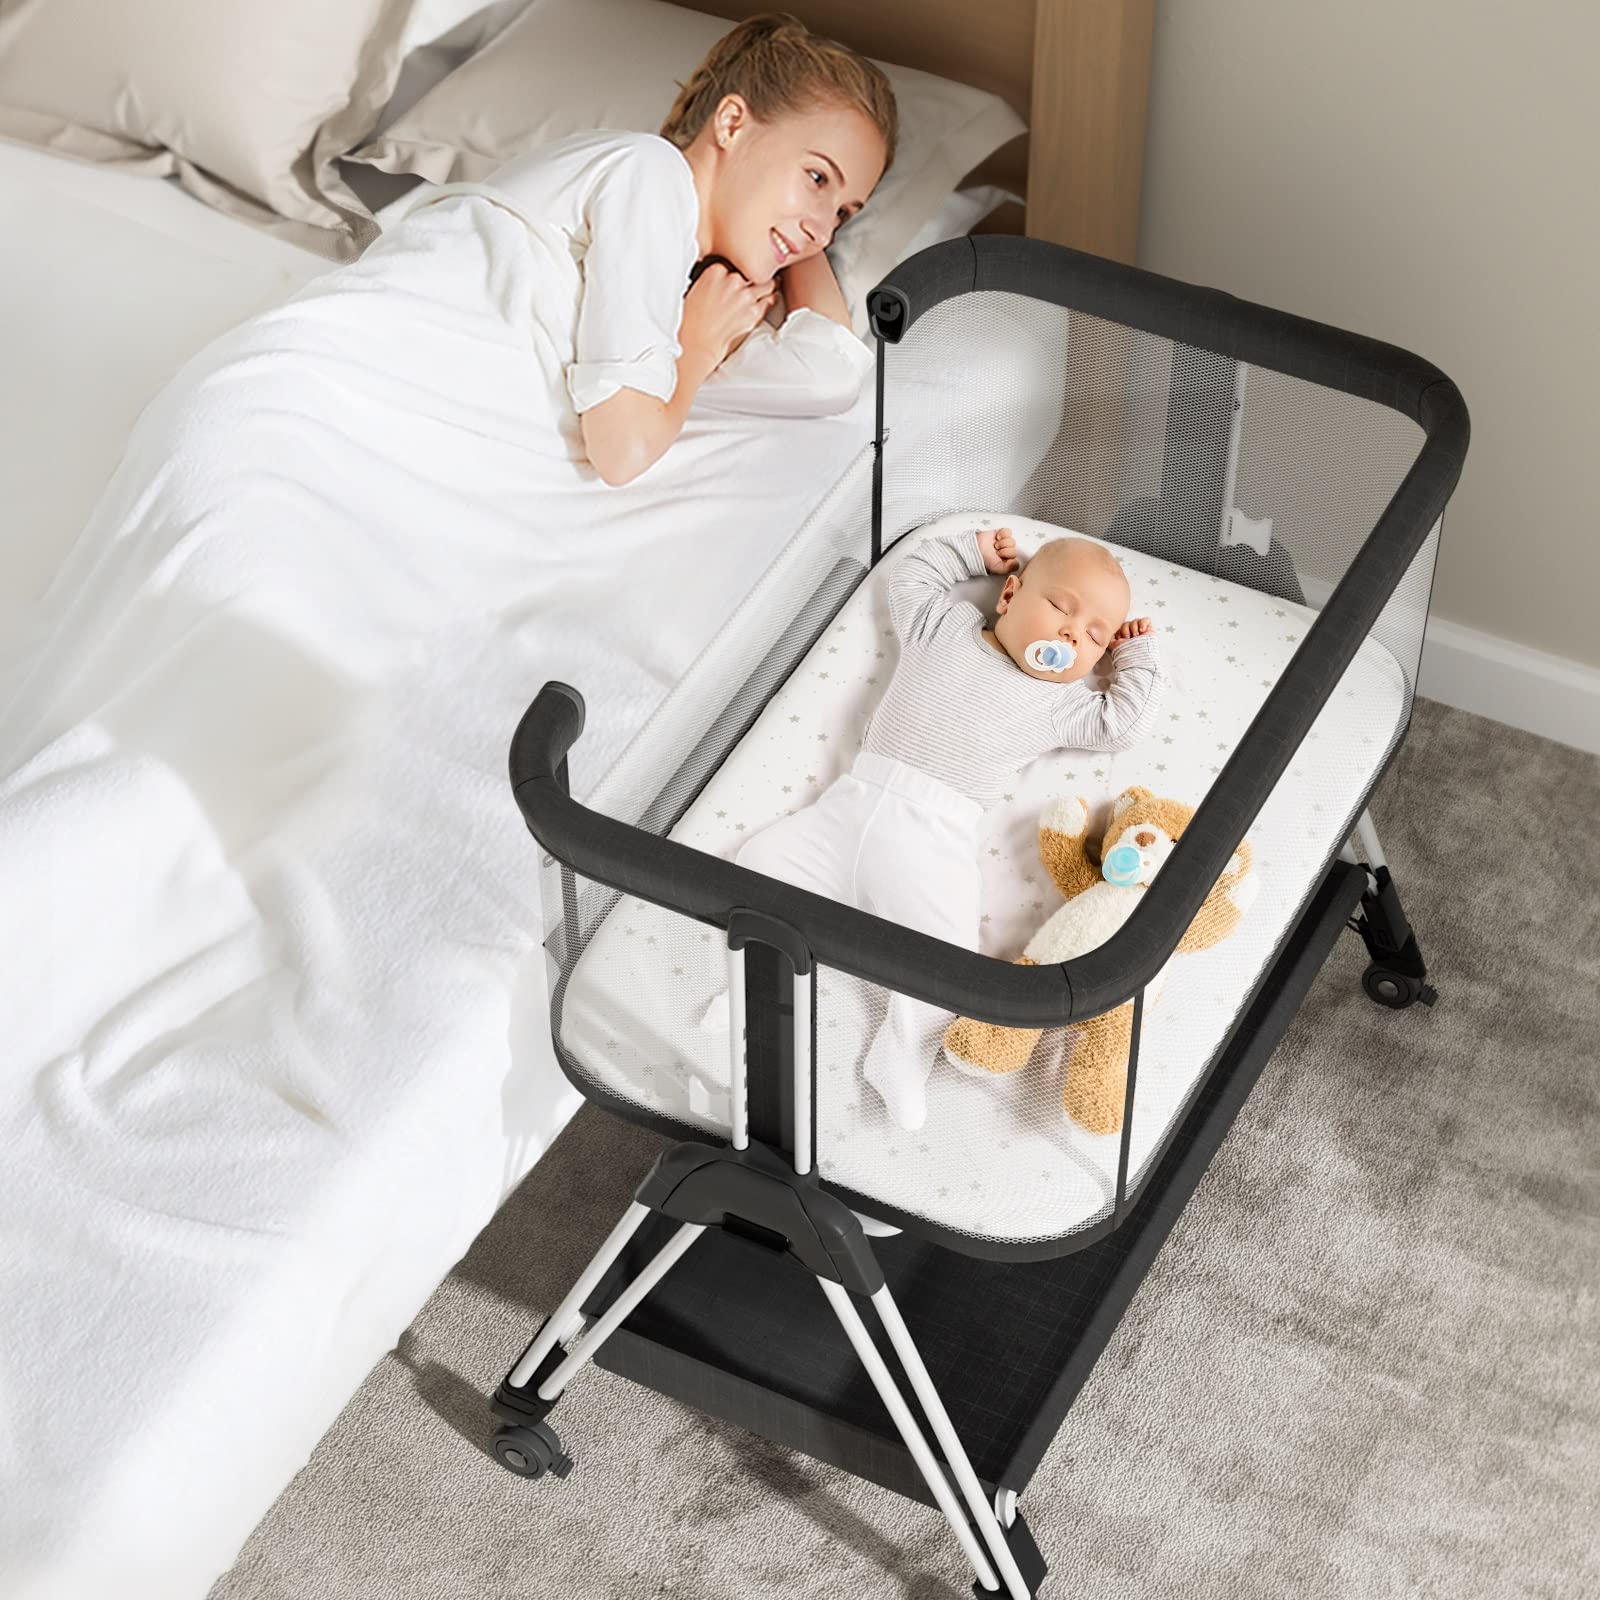 can baby sleep in bassinet if rolling over